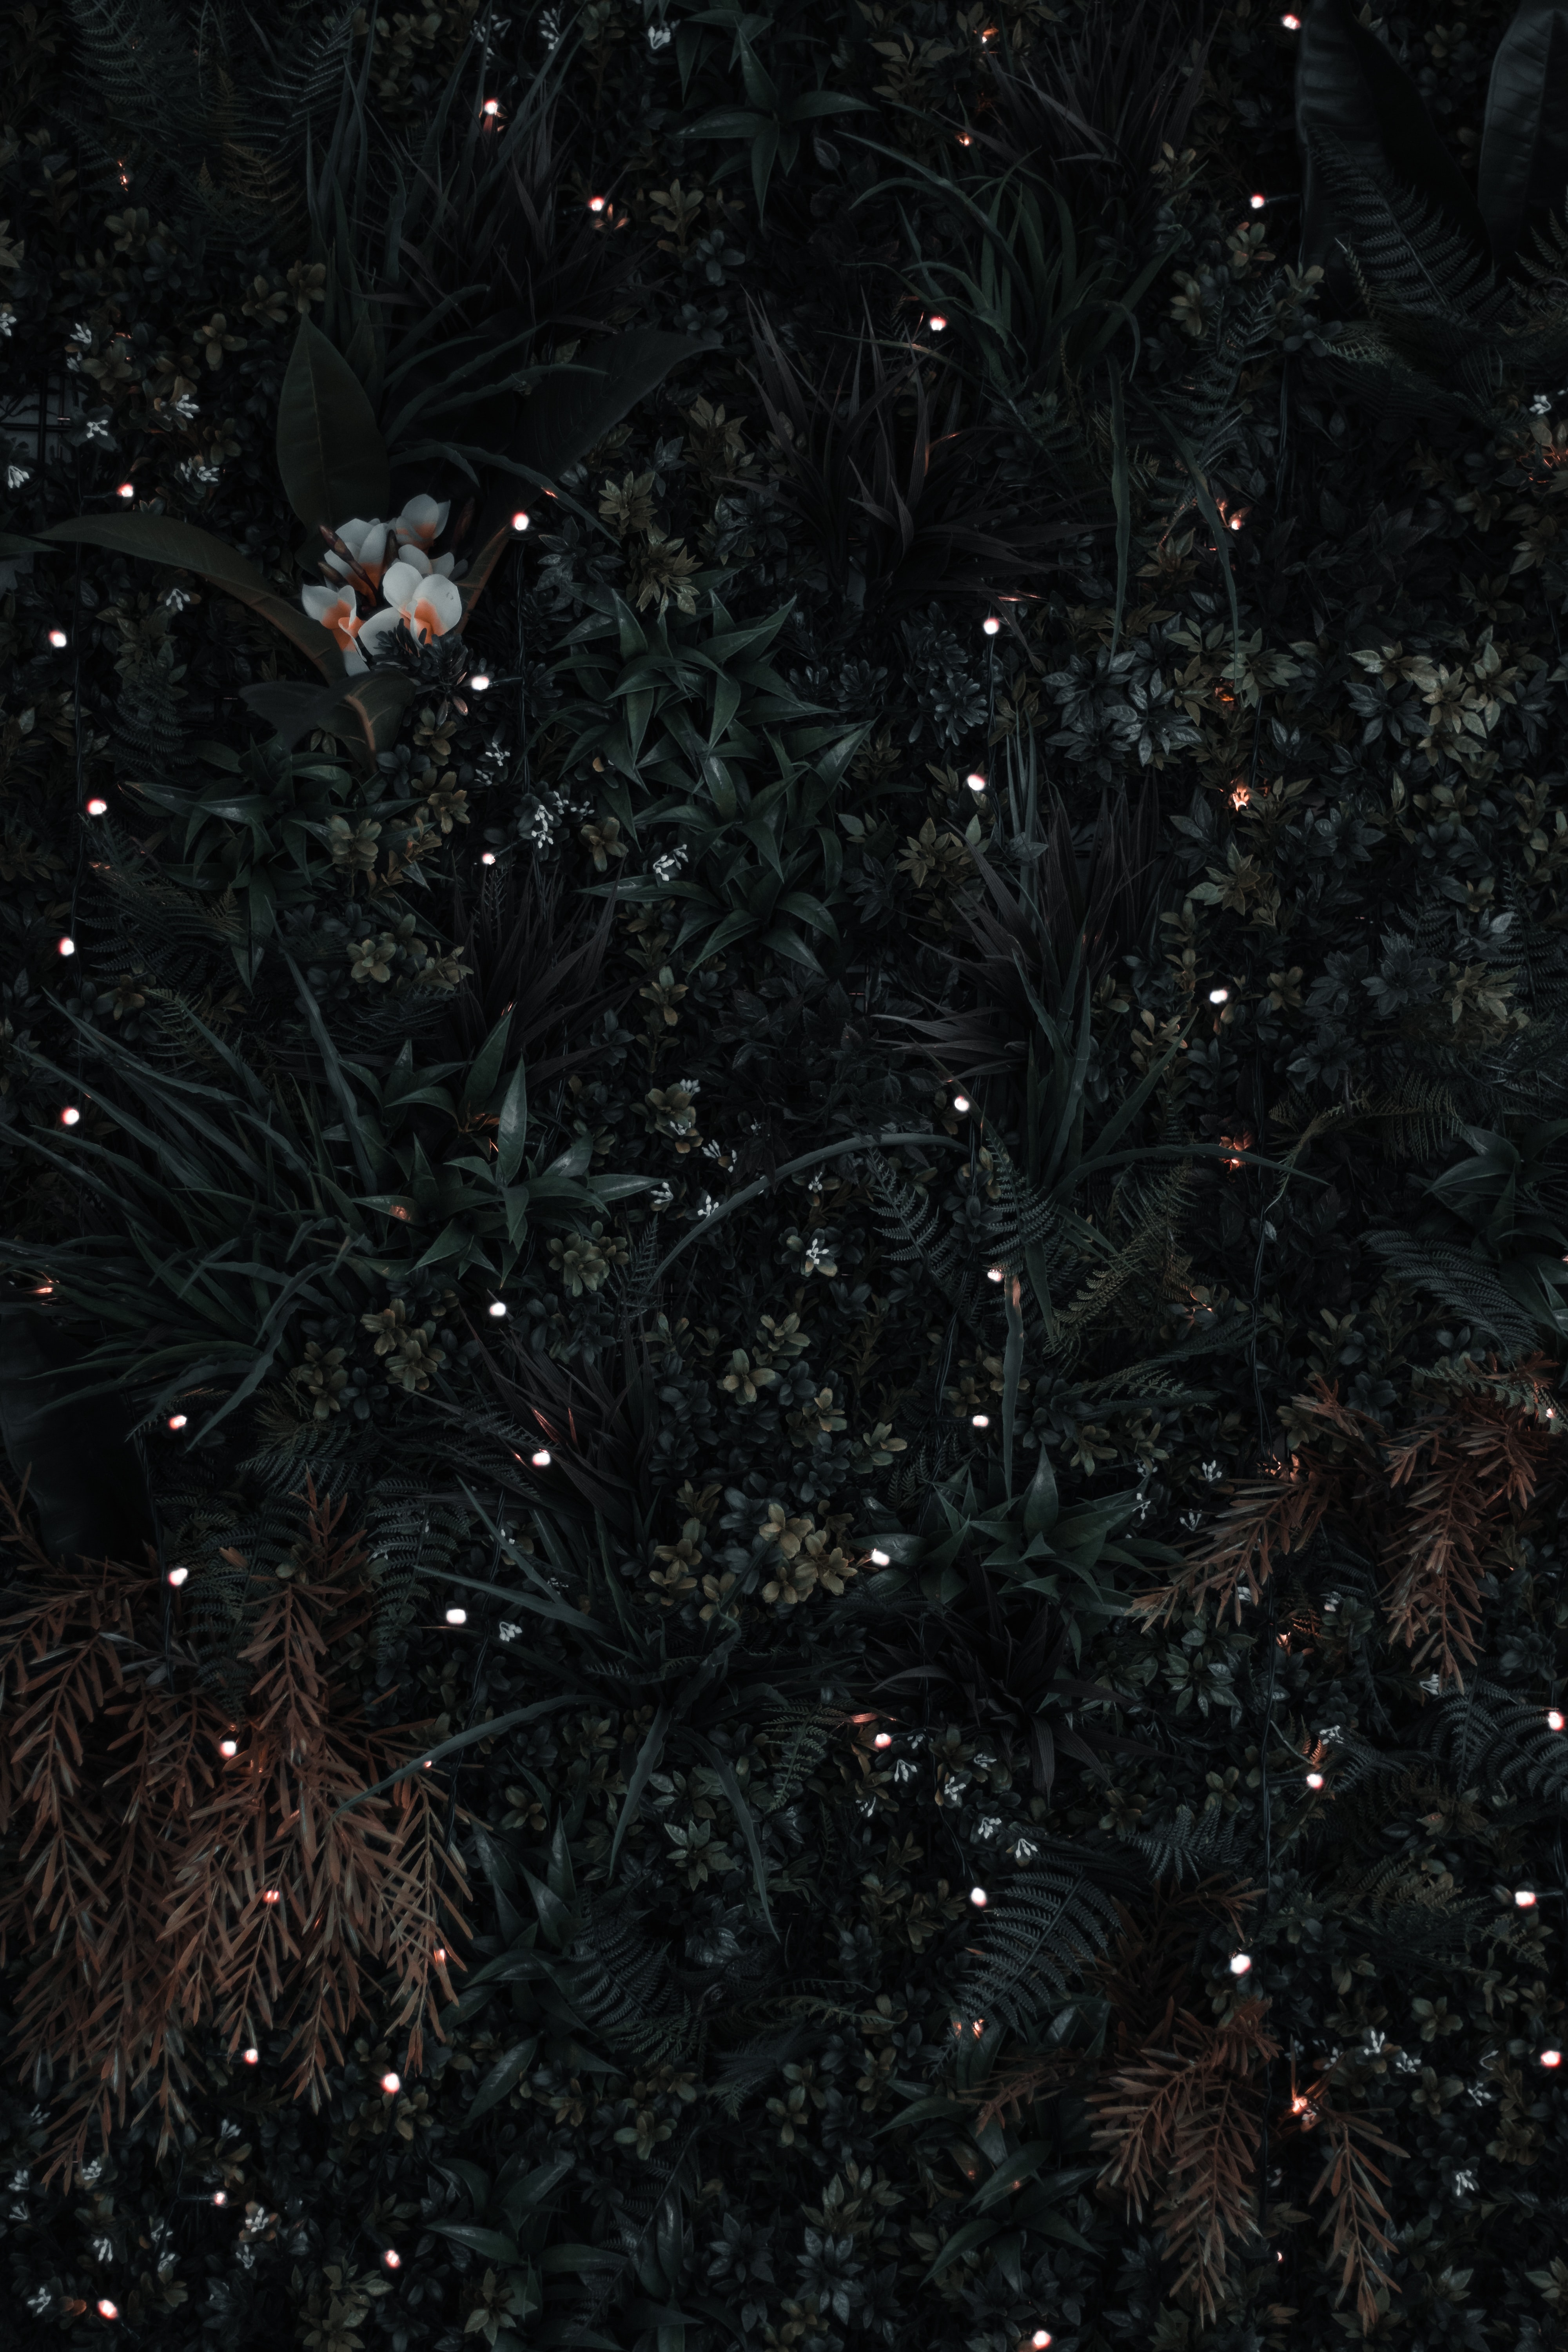 dark, view from above, grass, flowers home screen for smartphone